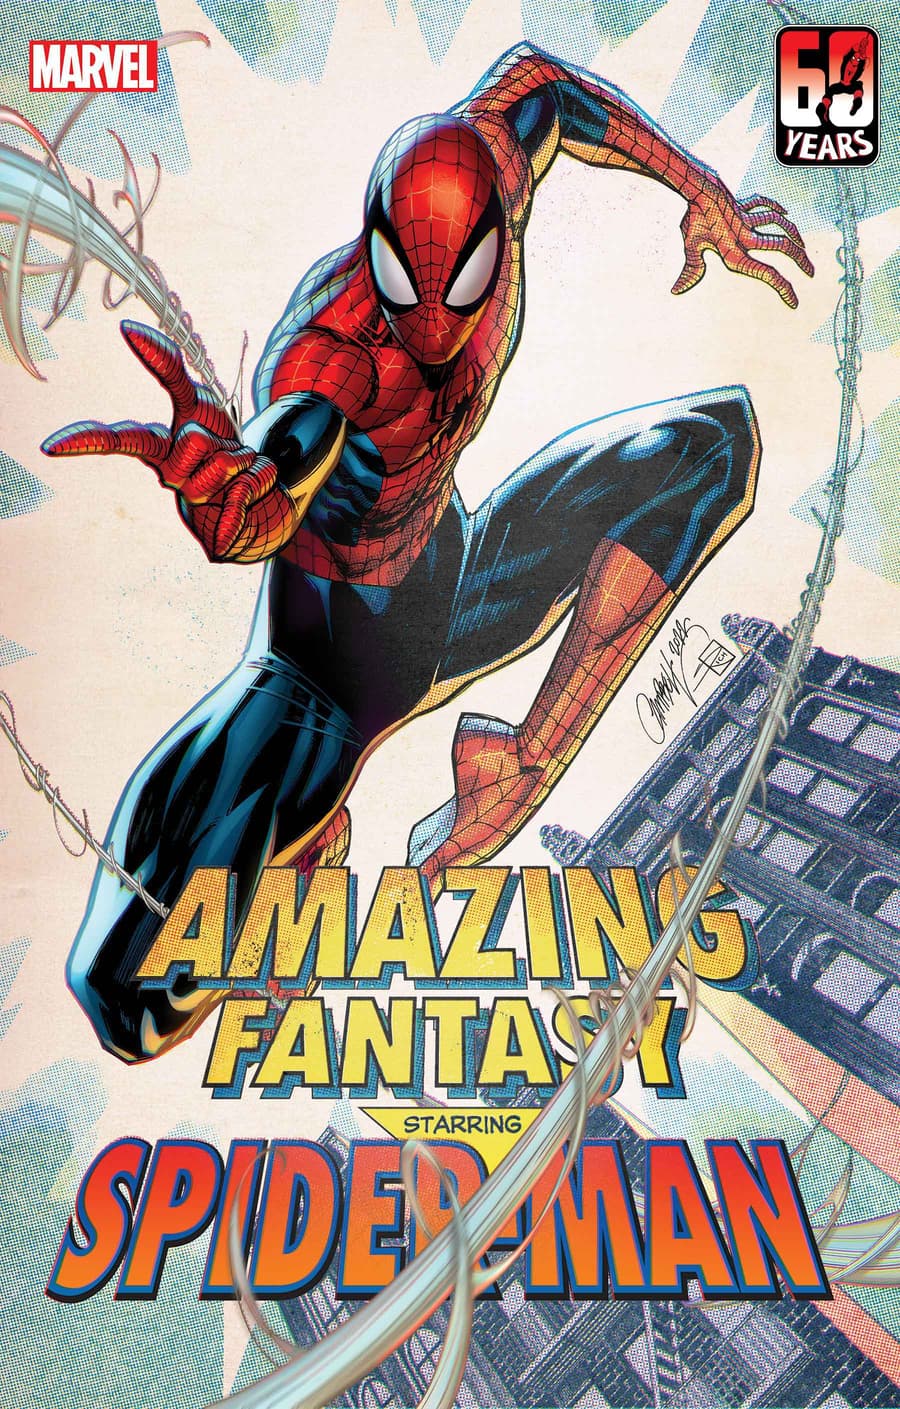 AMAZING FANTASY #1000 cover by J. Scott Campbell